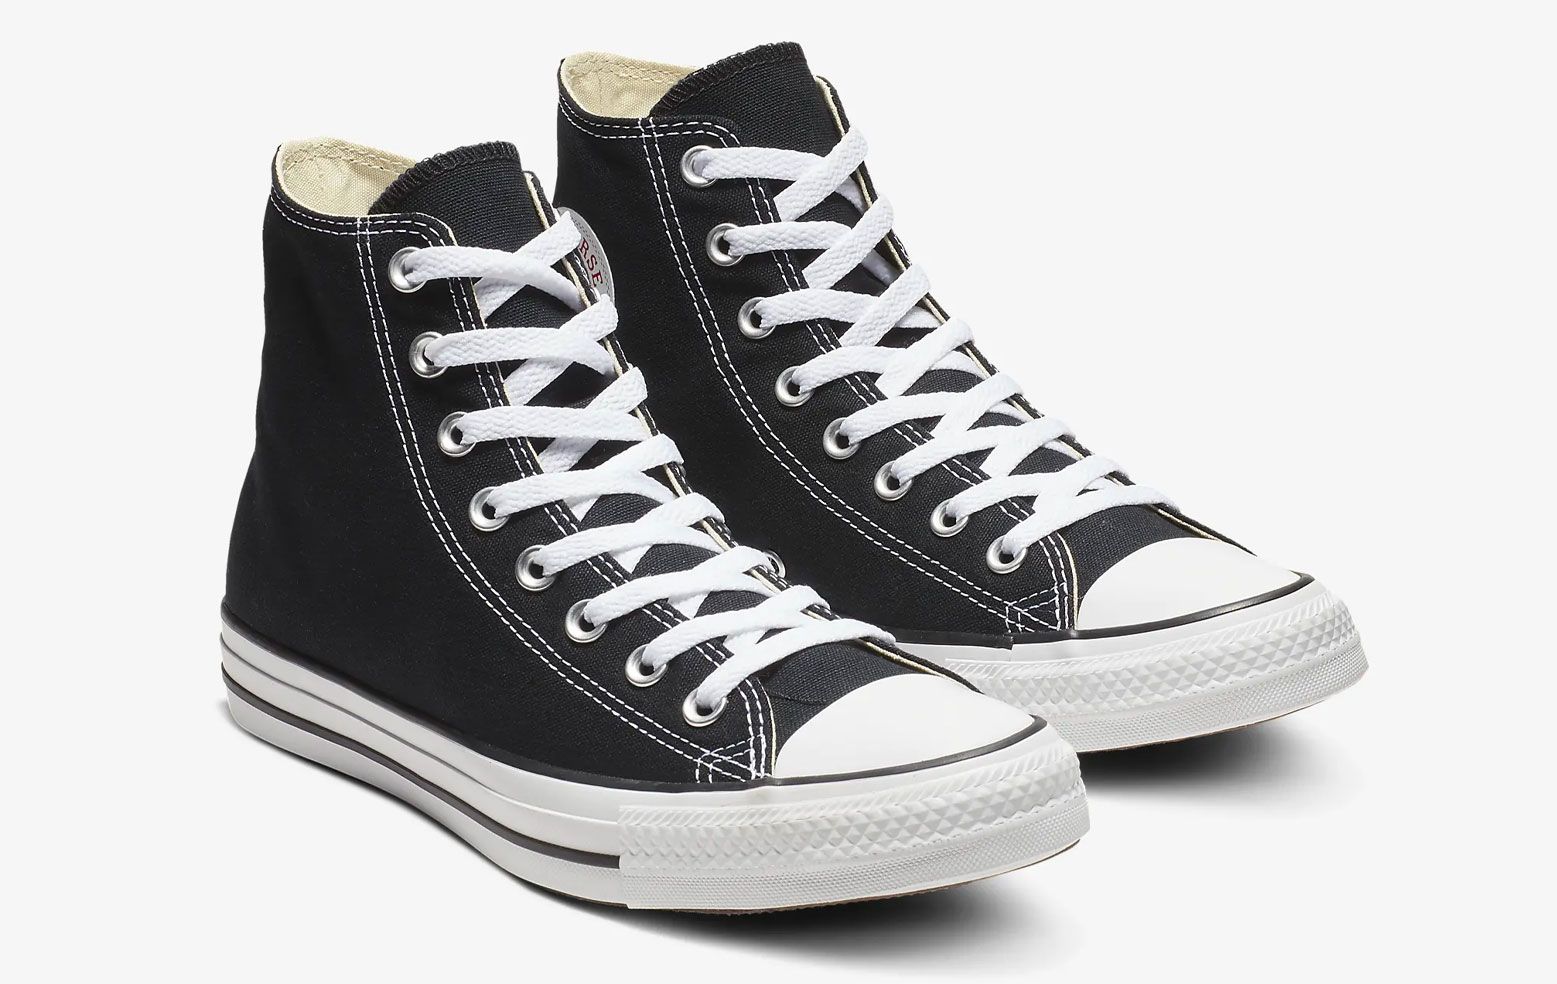 Converse product image of a white and black Chuck Taylor All Star.